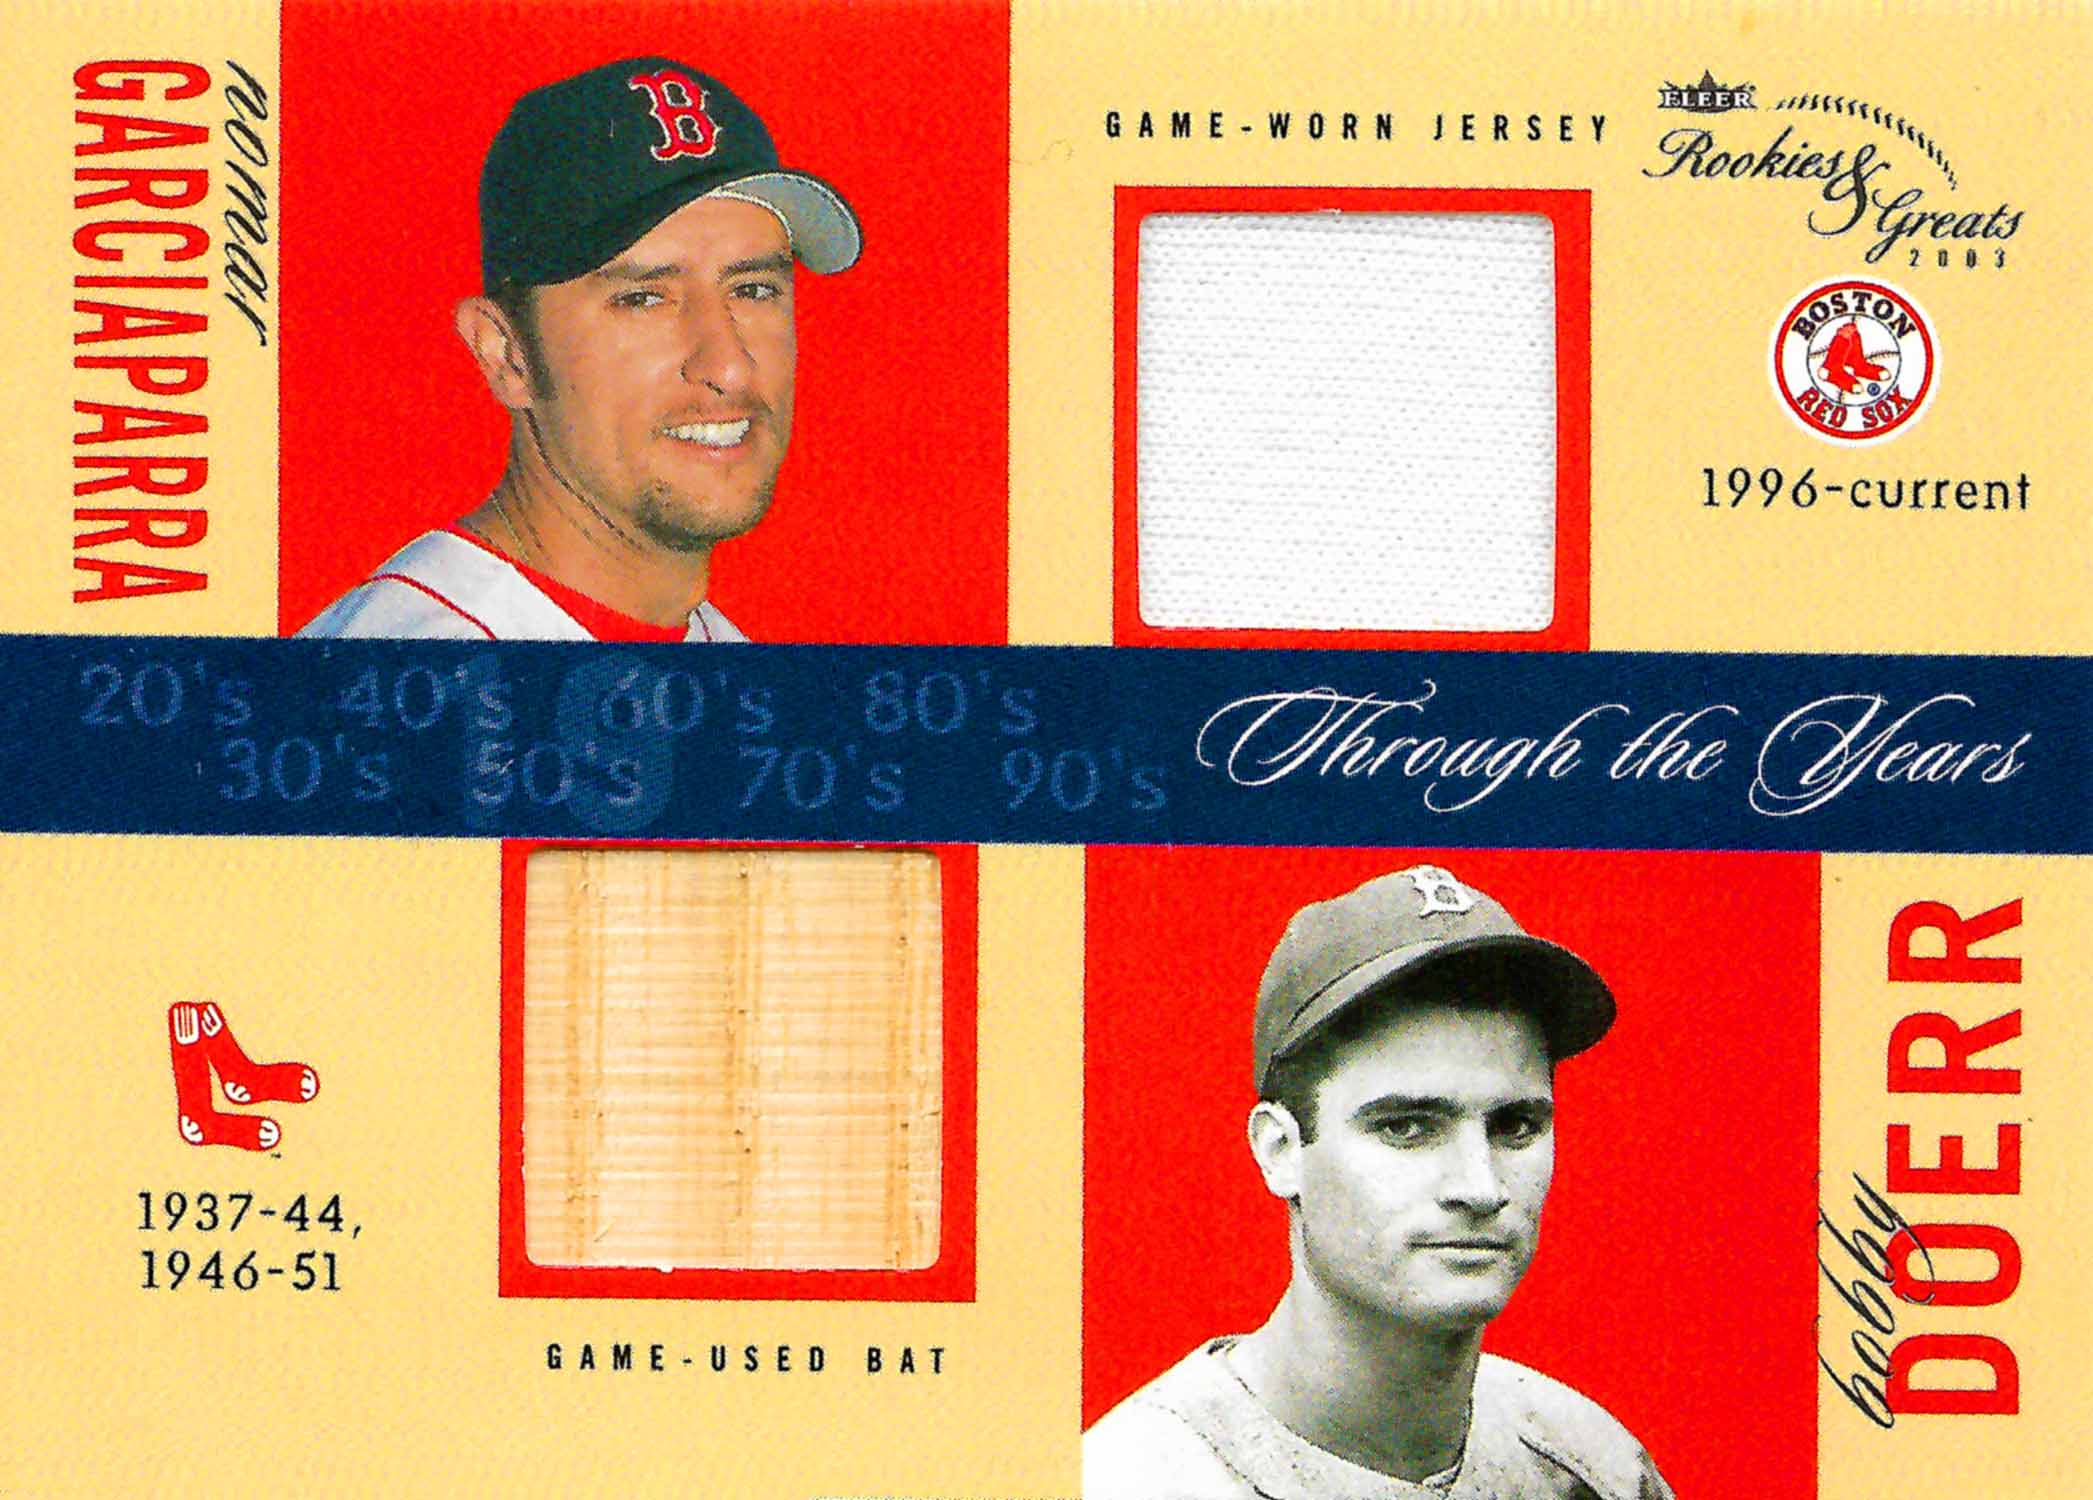 2003 Fleer Rookies and Greats Through the Years Game Used Dual Jersey/Bat